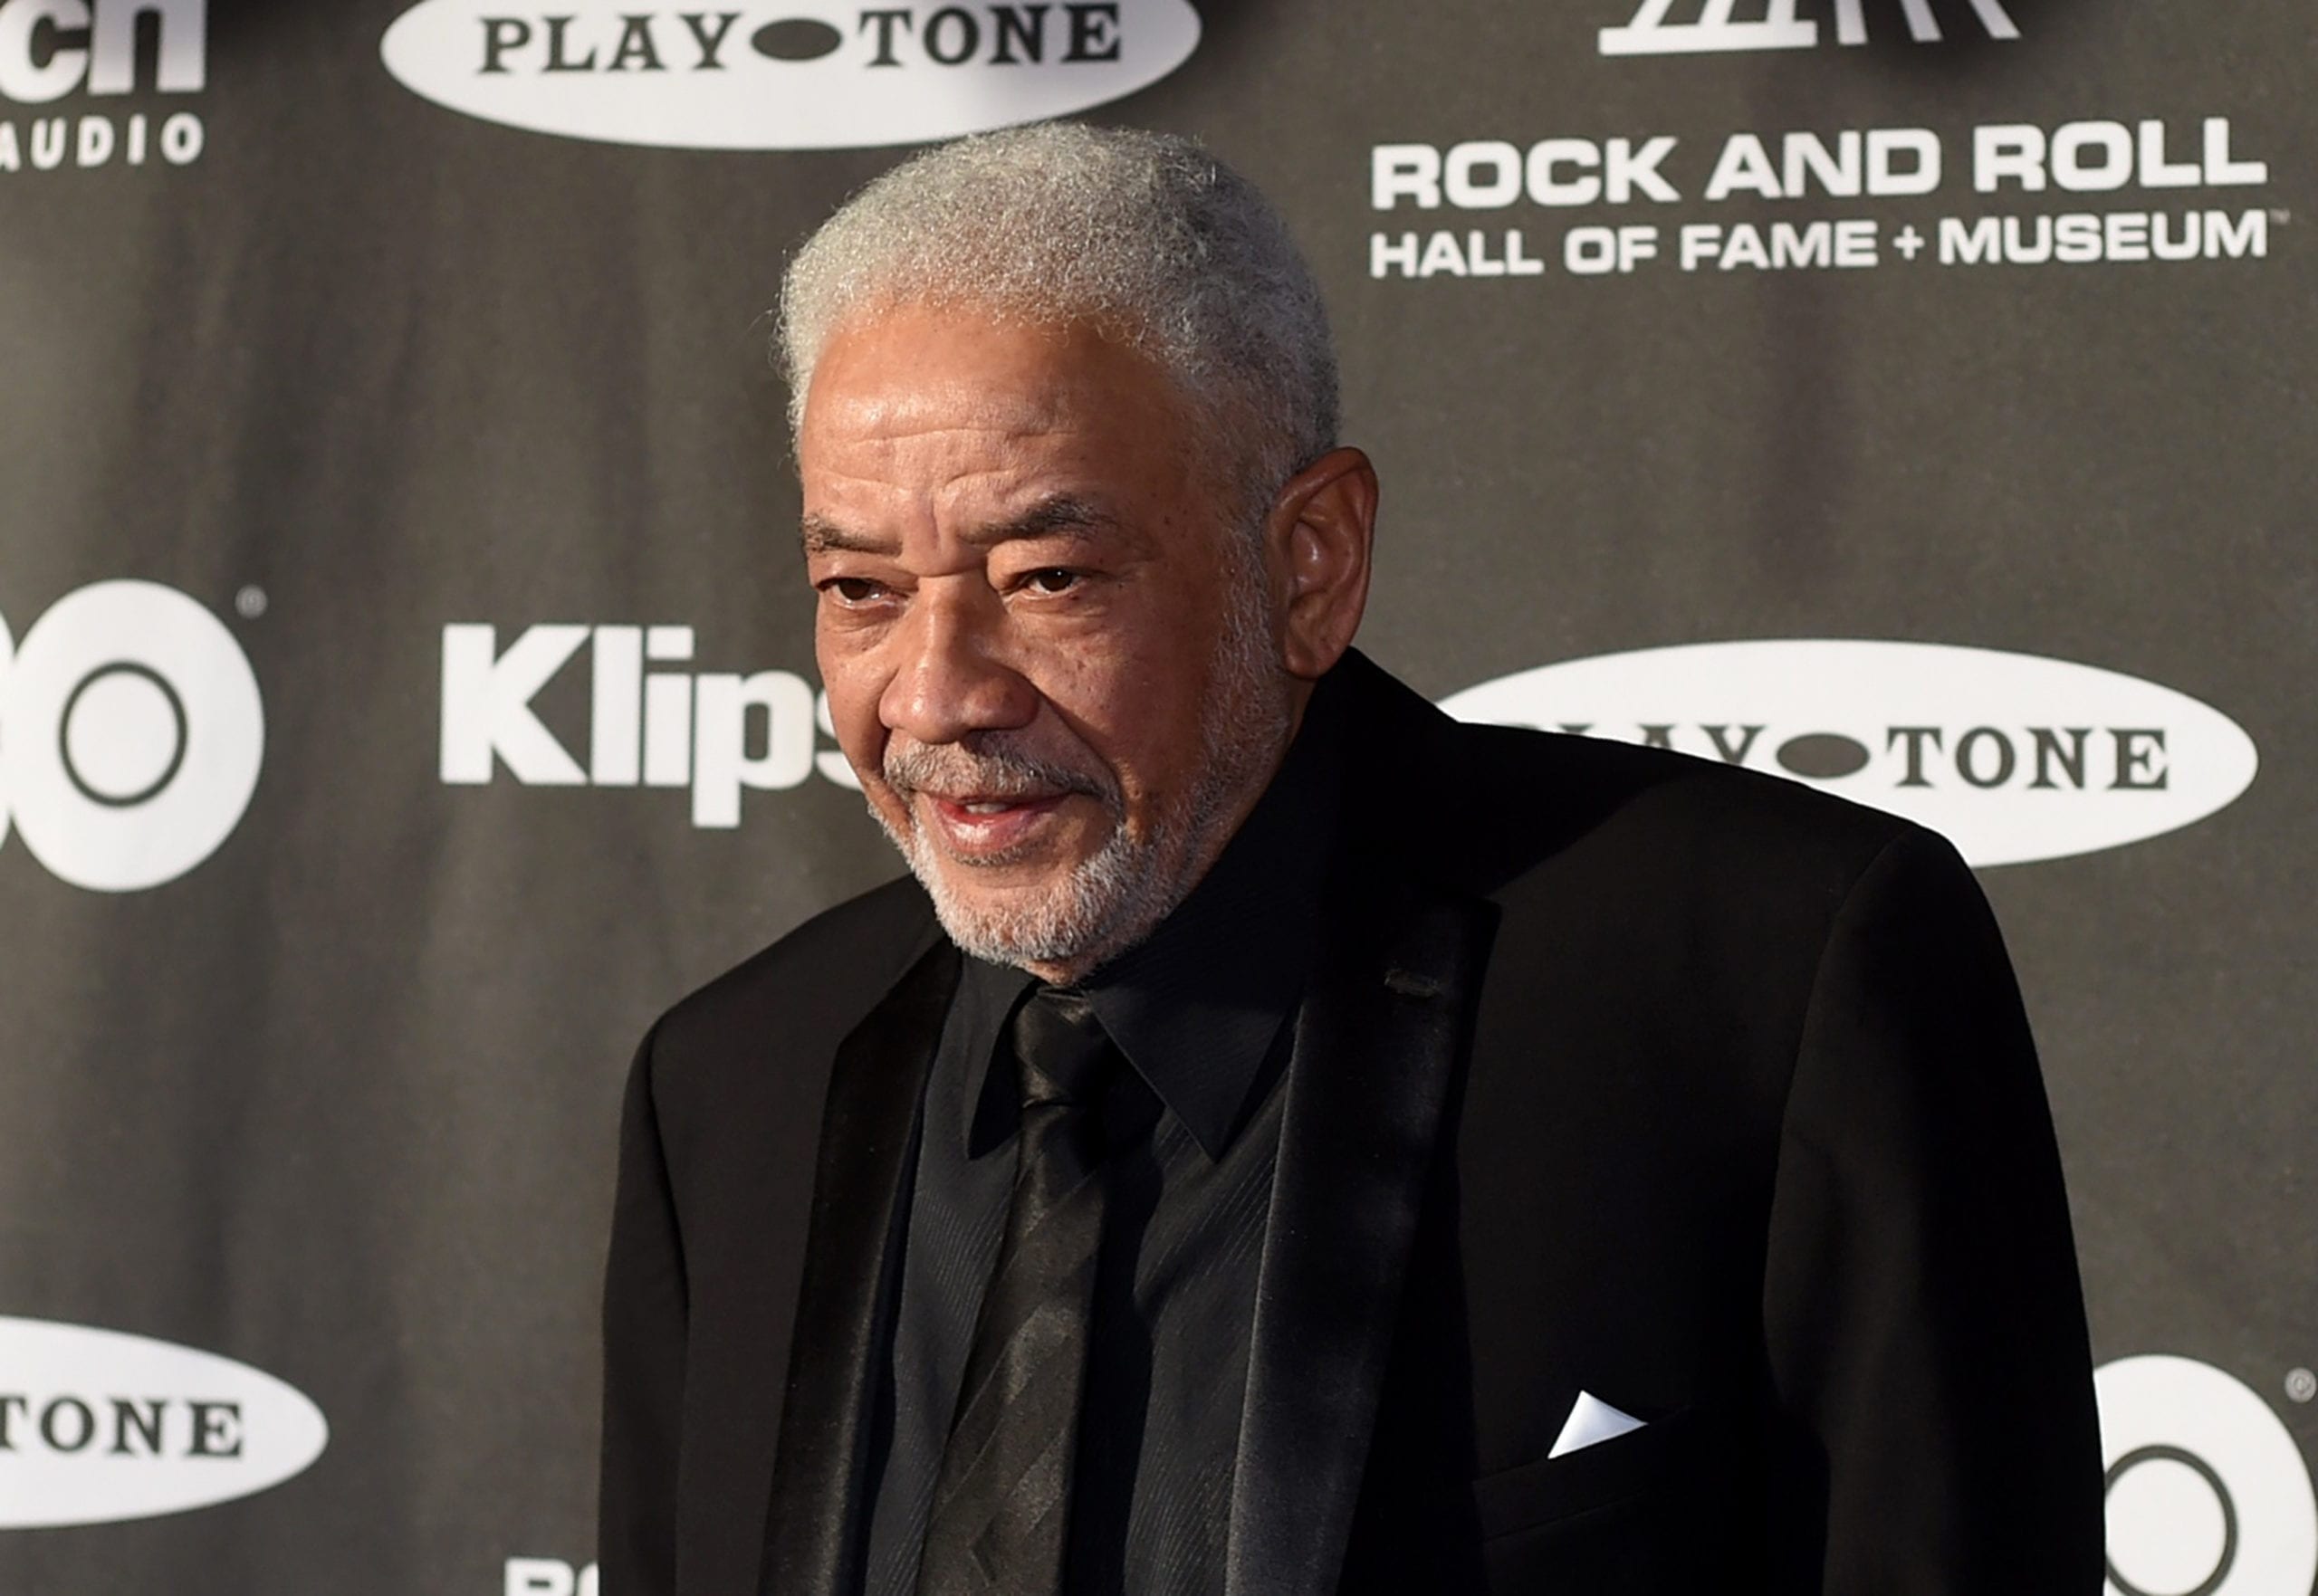 ‘Lean On Me’ singer Bill Withers dies aged 81